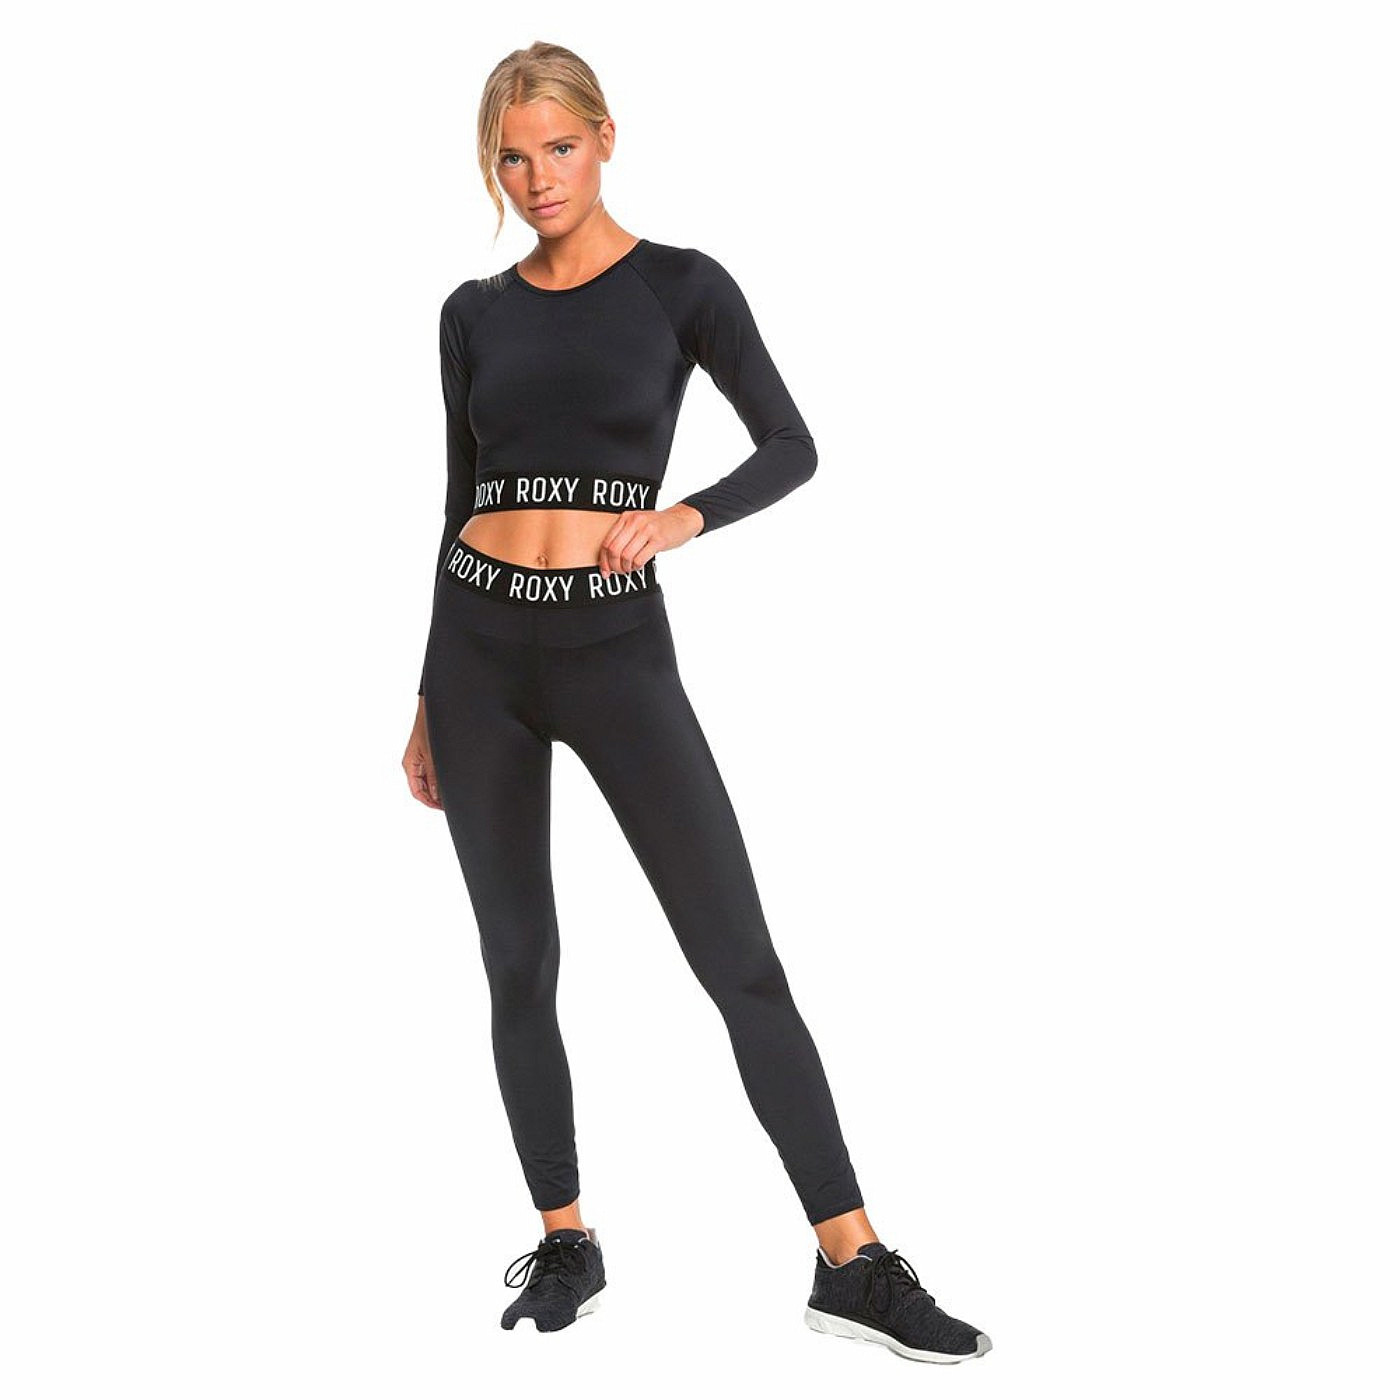 Women's top from the iconic brand ROXY | Lycra clothing for UPF 50